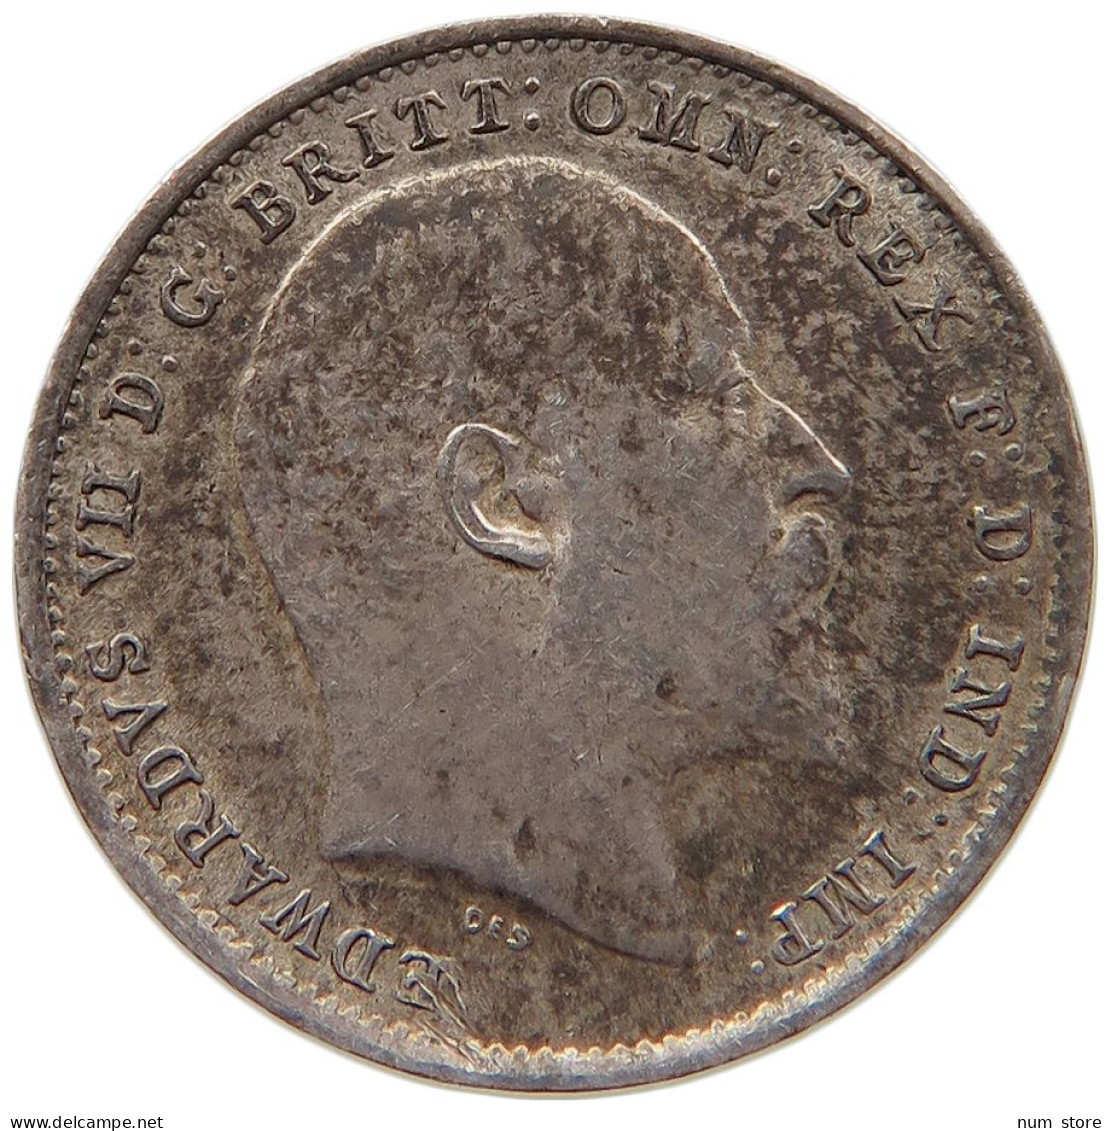 GREAT BRITAIN THREEPENCE 1902 Edward VII., 1901 - 1910 #s001 0039 - F. 3 Pence